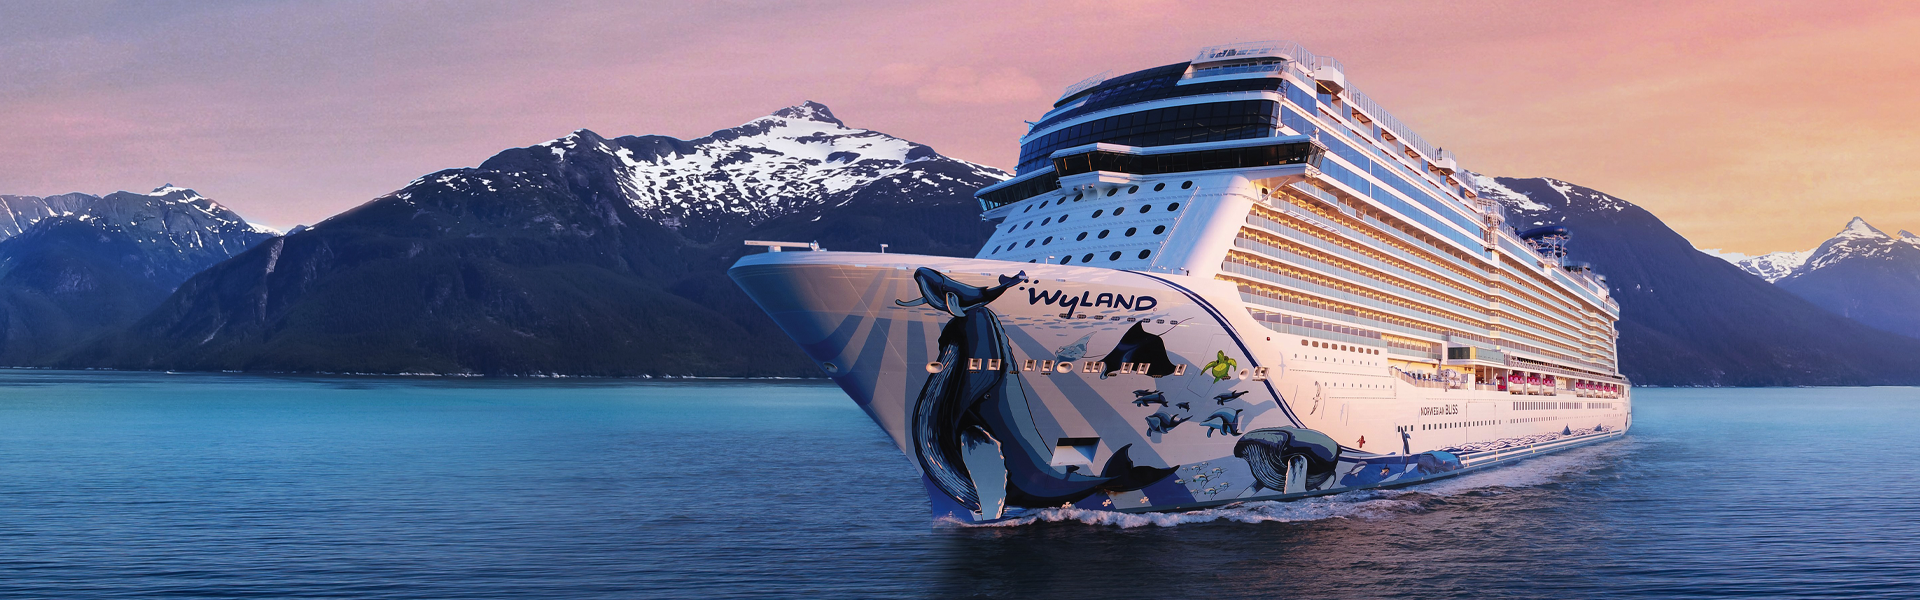 Exclusive cruises to Alaska with Norwegian Bliss